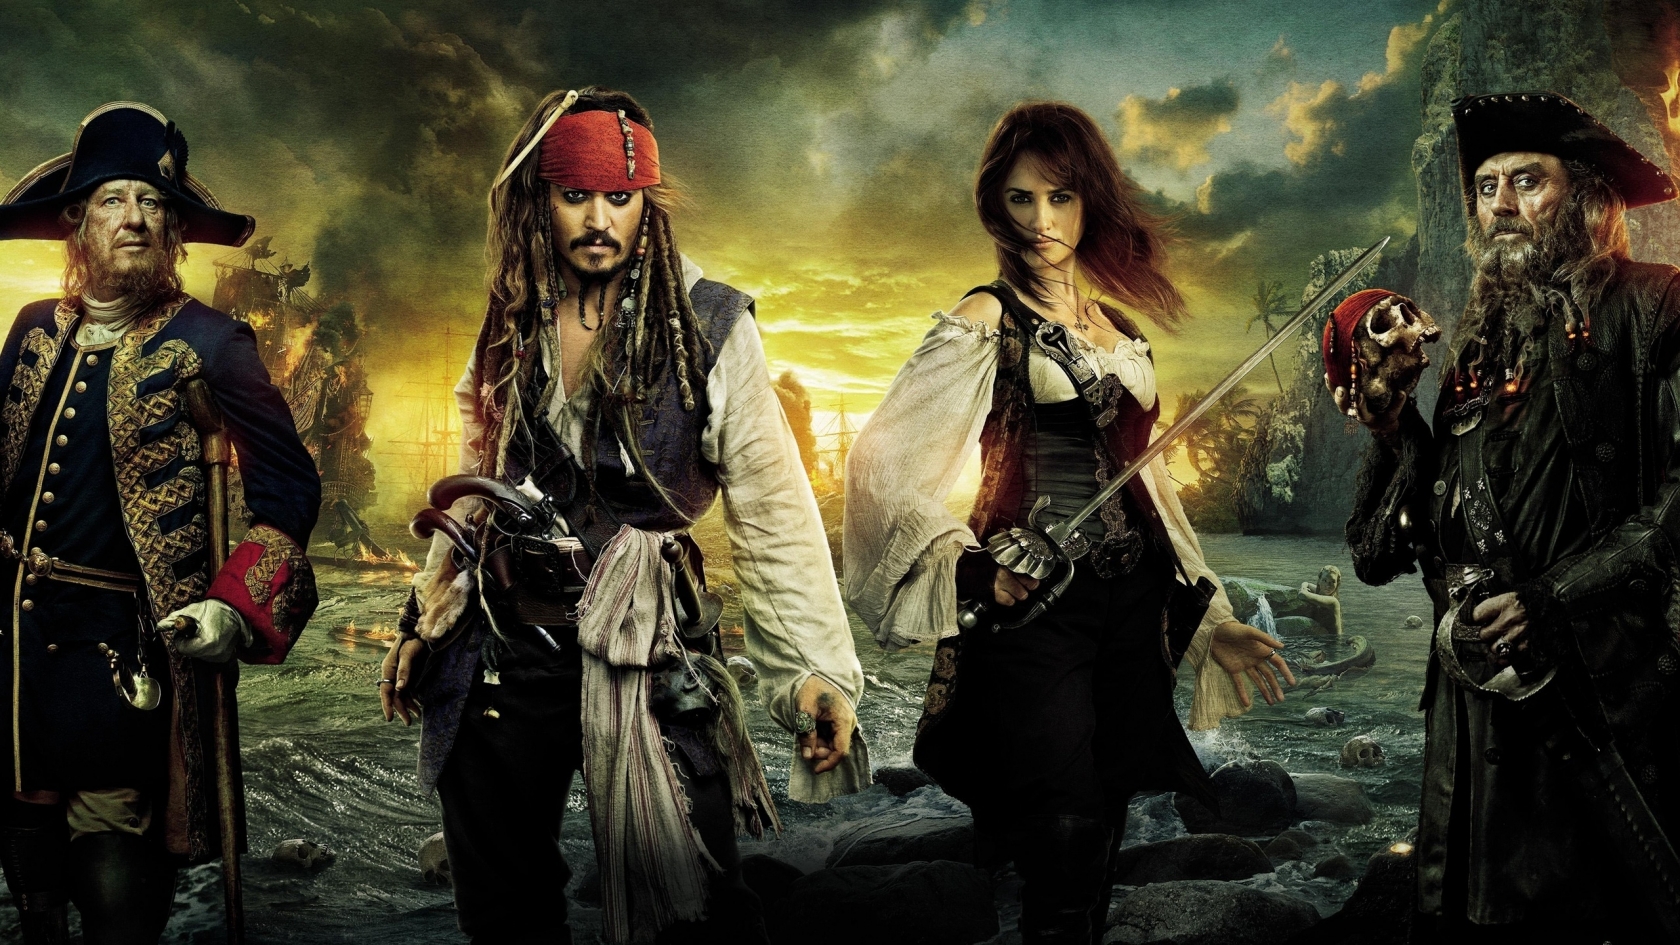 Pirates of the Caribbean Characters for 1680 x 945 HDTV resolution